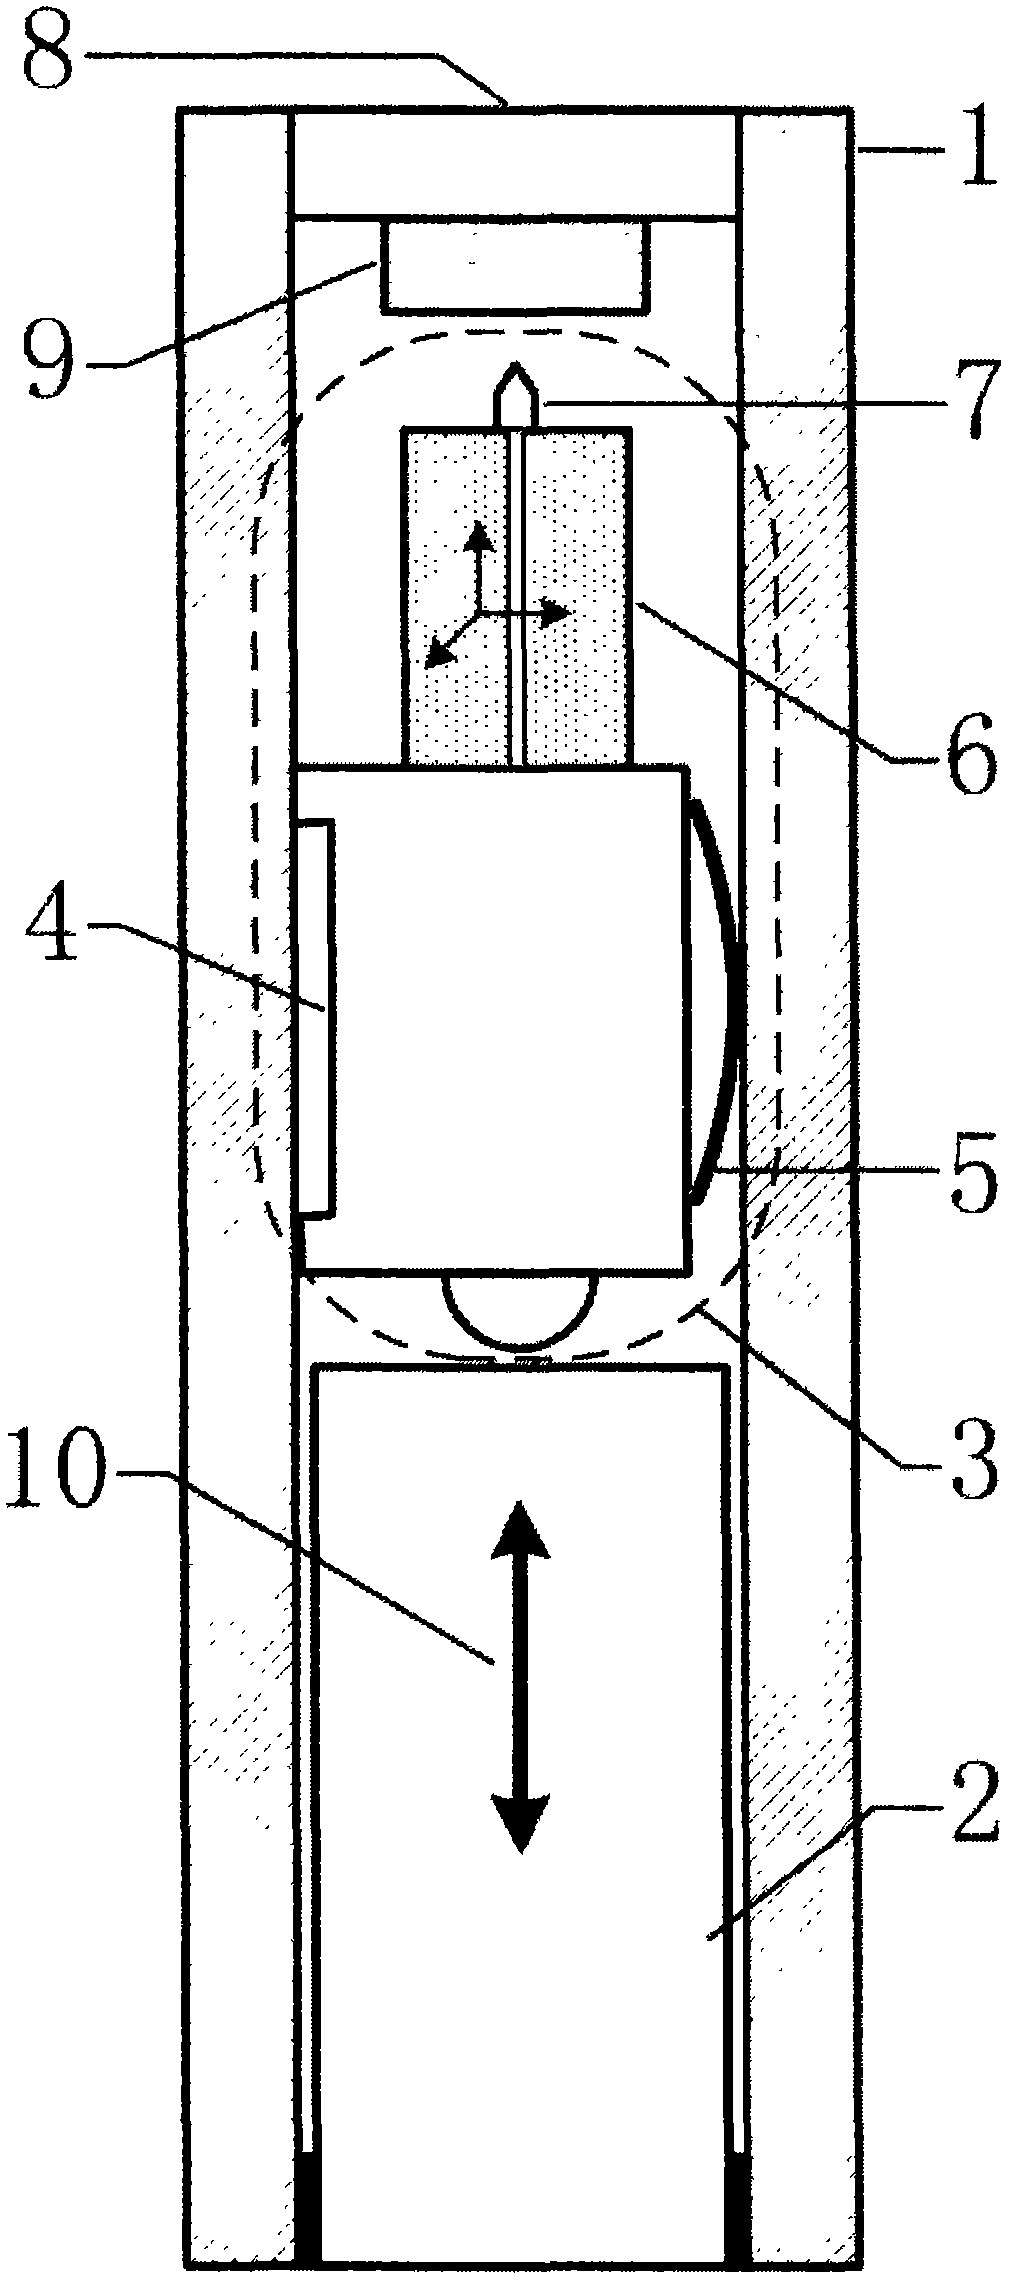 Circular-tube-shaped externally-insulated narrow-size lens body of scanning probe microscope